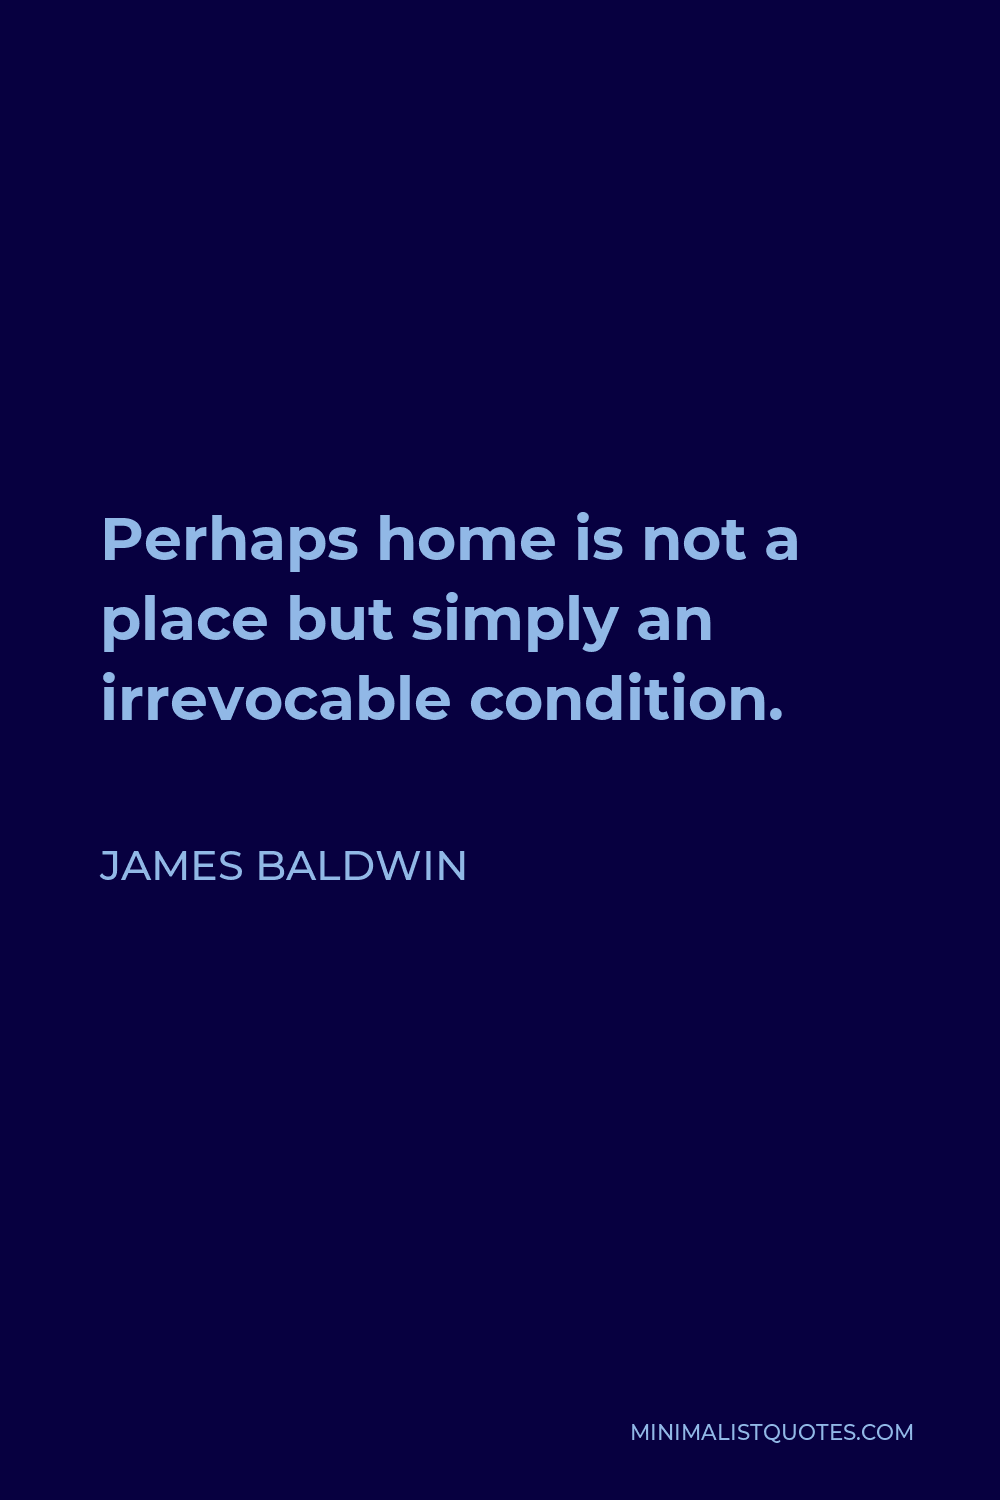 James Baldwin Quote - Perhaps home is not a place but simply an irrevocable condition.